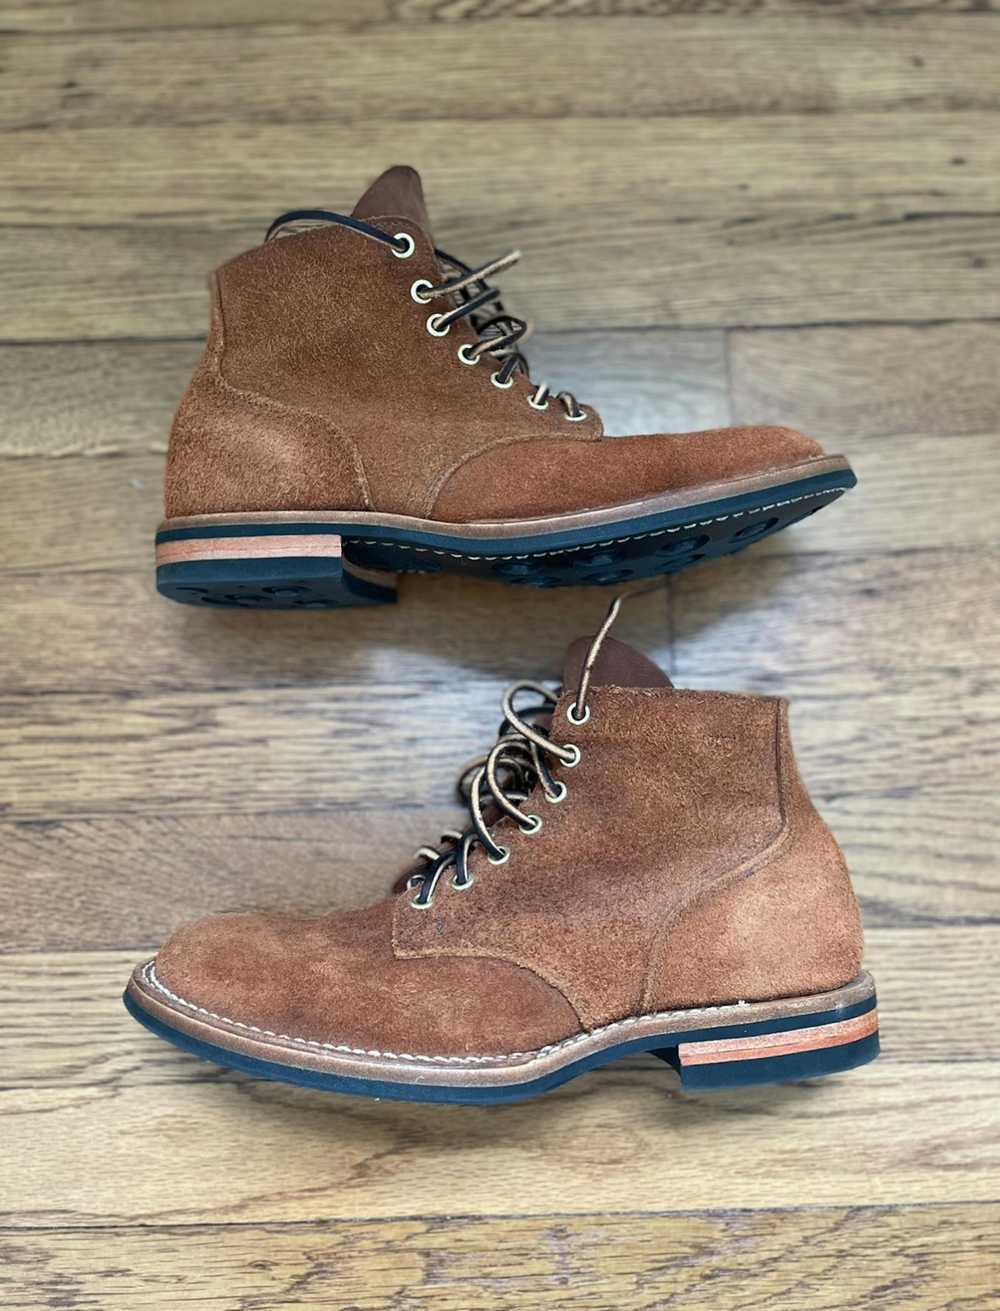 Viberg Viberg Service Boot in Aged Bark Roughout - image 3